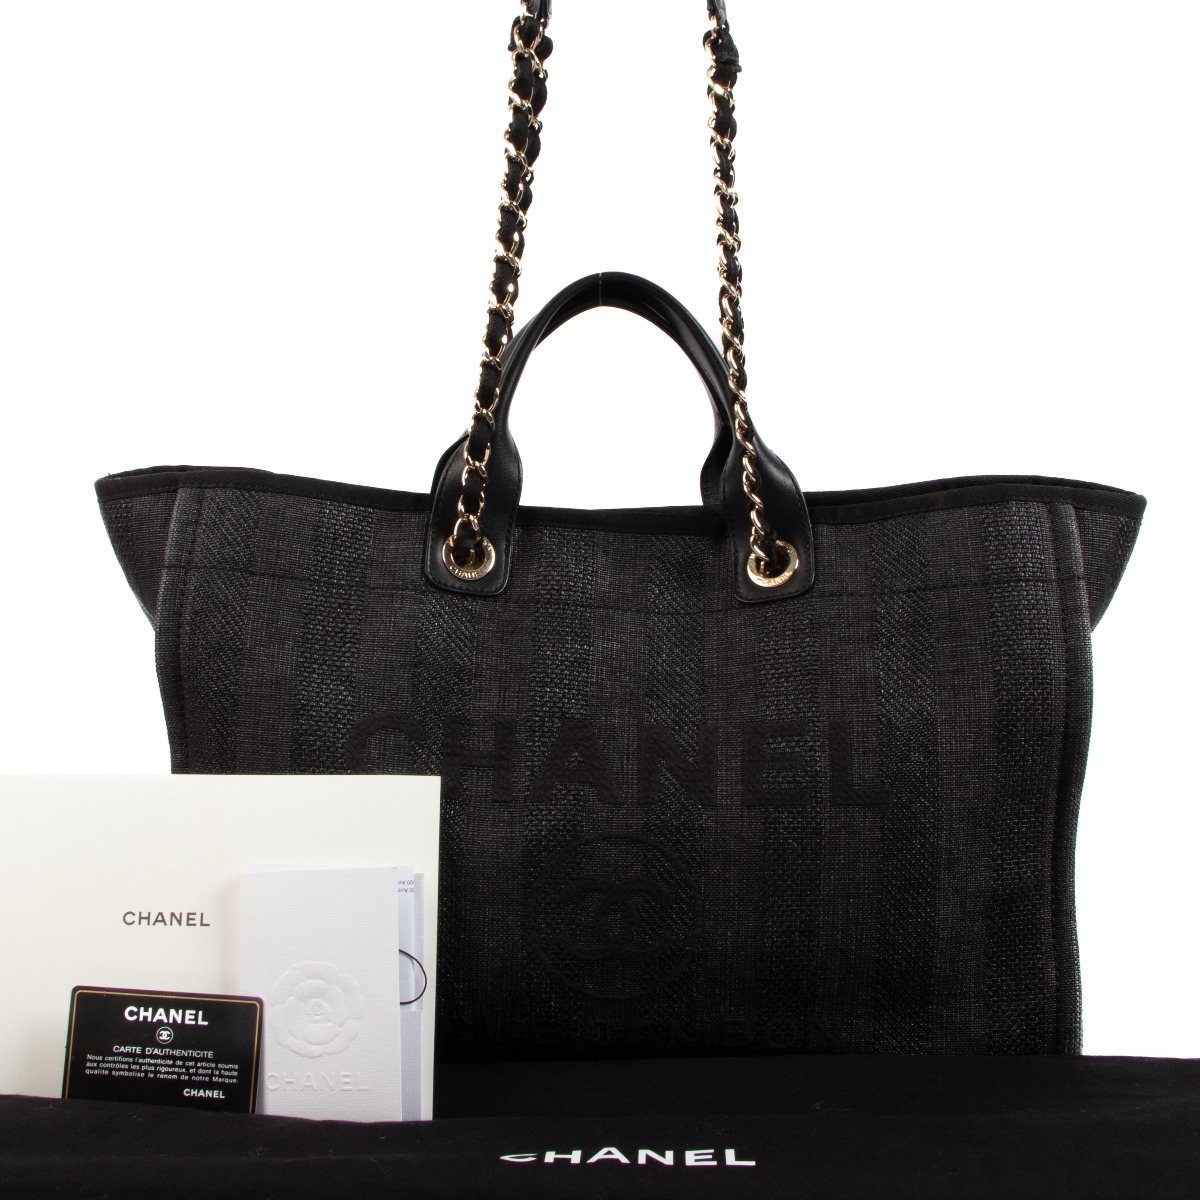 CHANEL Canvas Exterior Tote Bags & Handbags for Women, Authenticity  Guaranteed